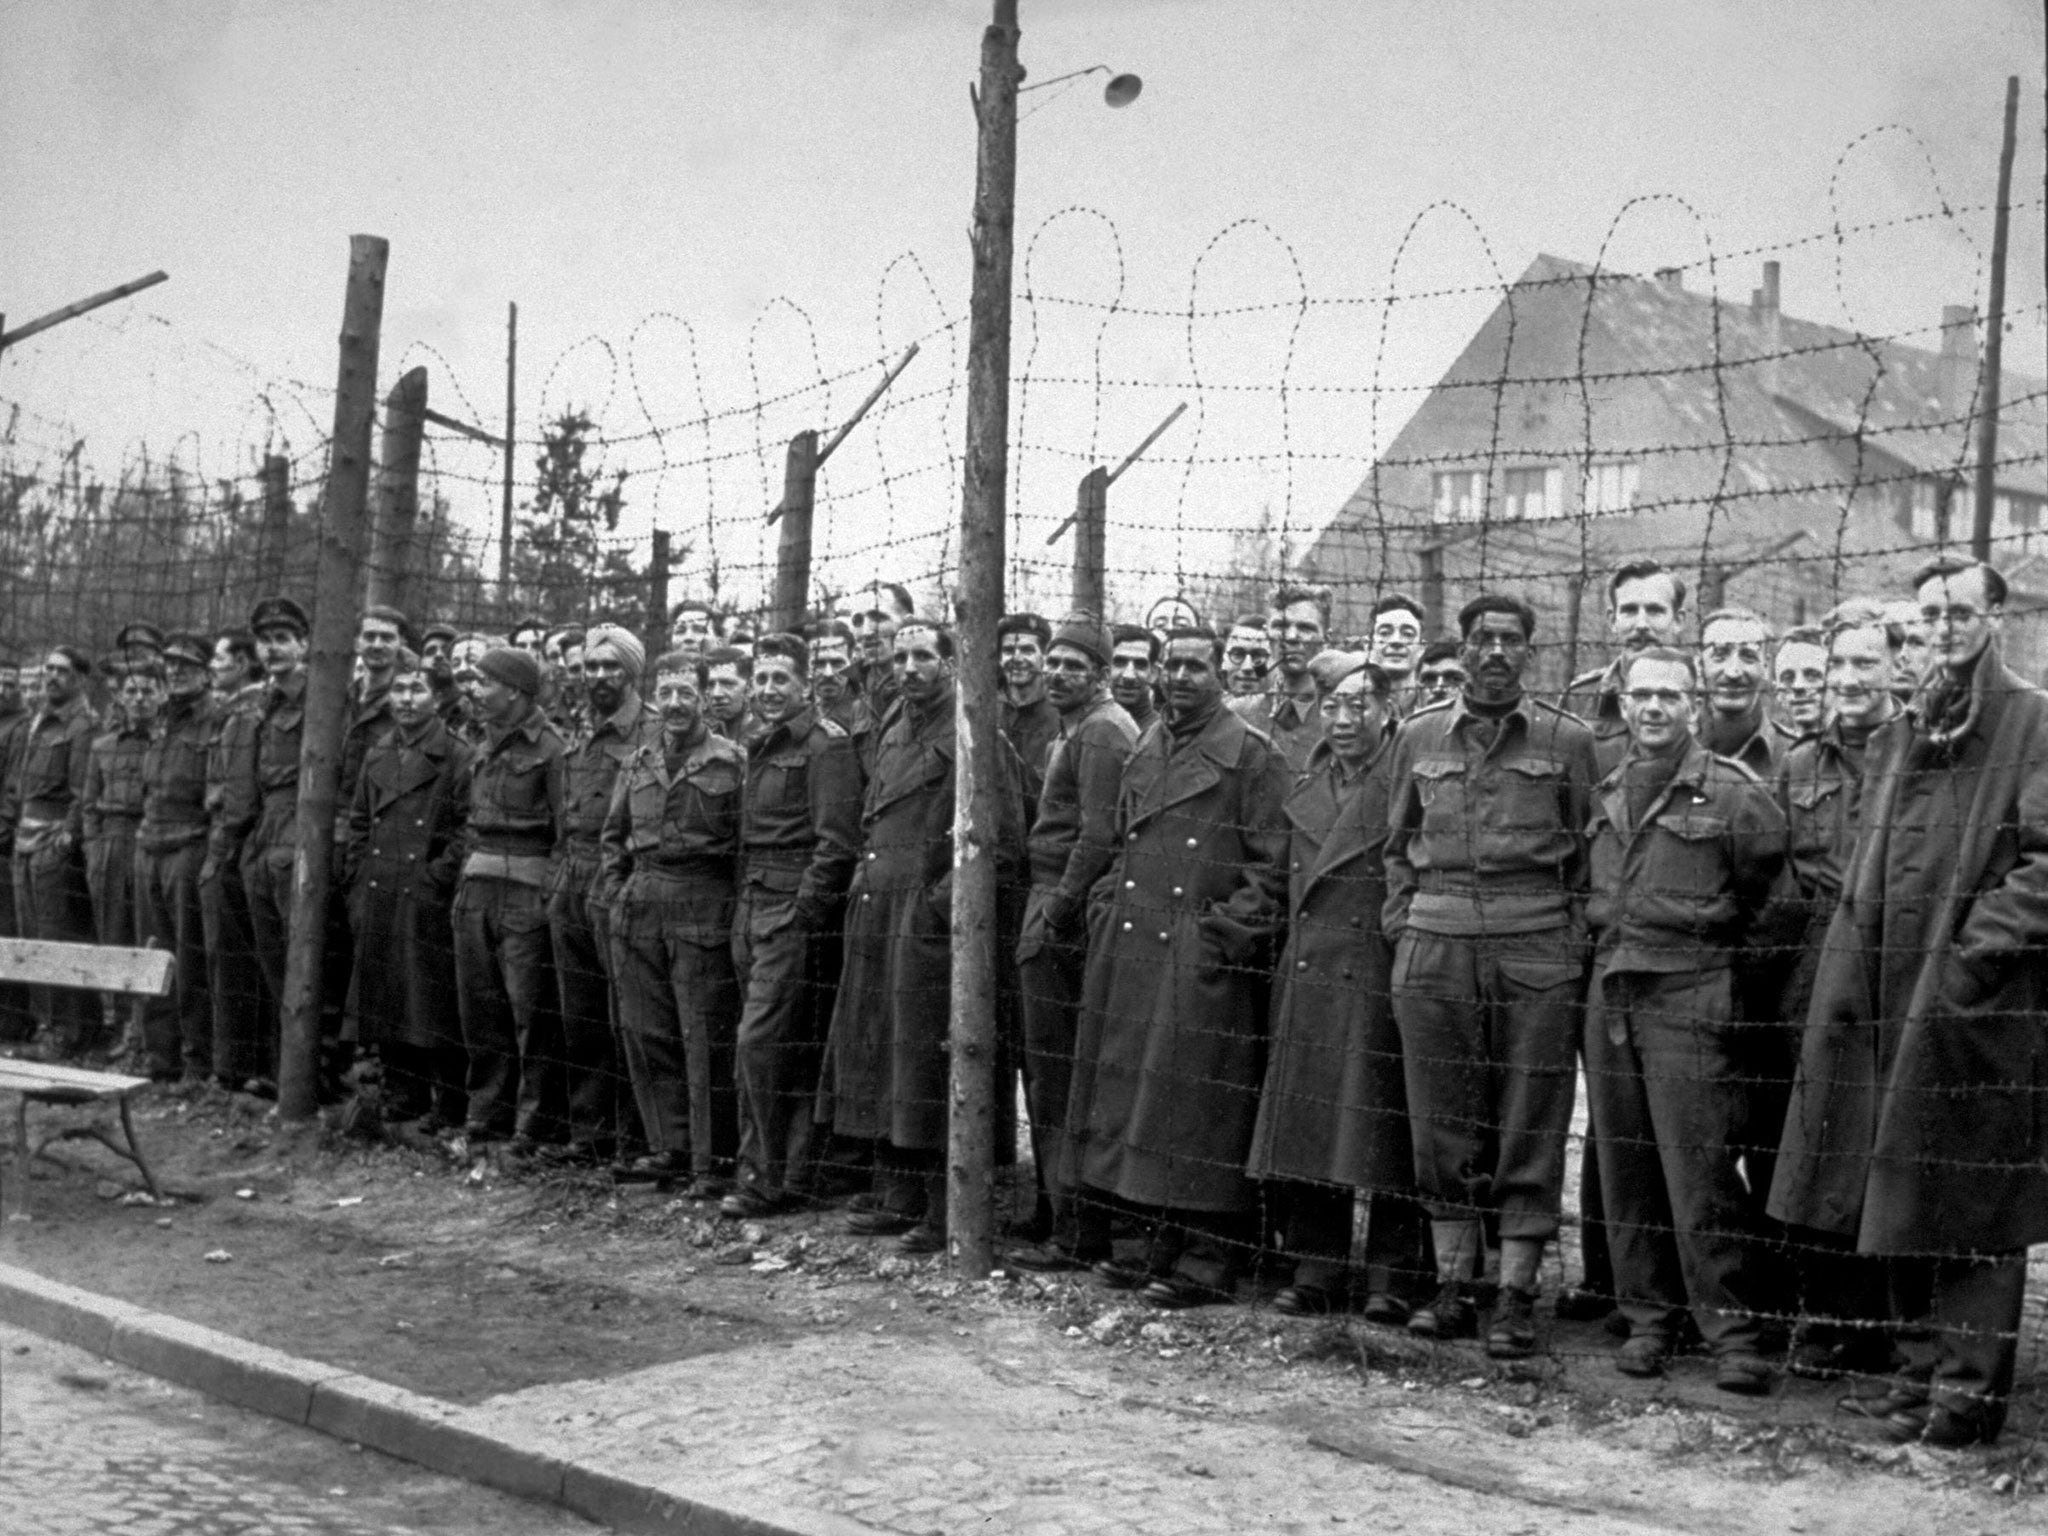 1945: British officers liberated by the 9th Army from Brunswick Oflag 79, the largest British officers' camp in Germany